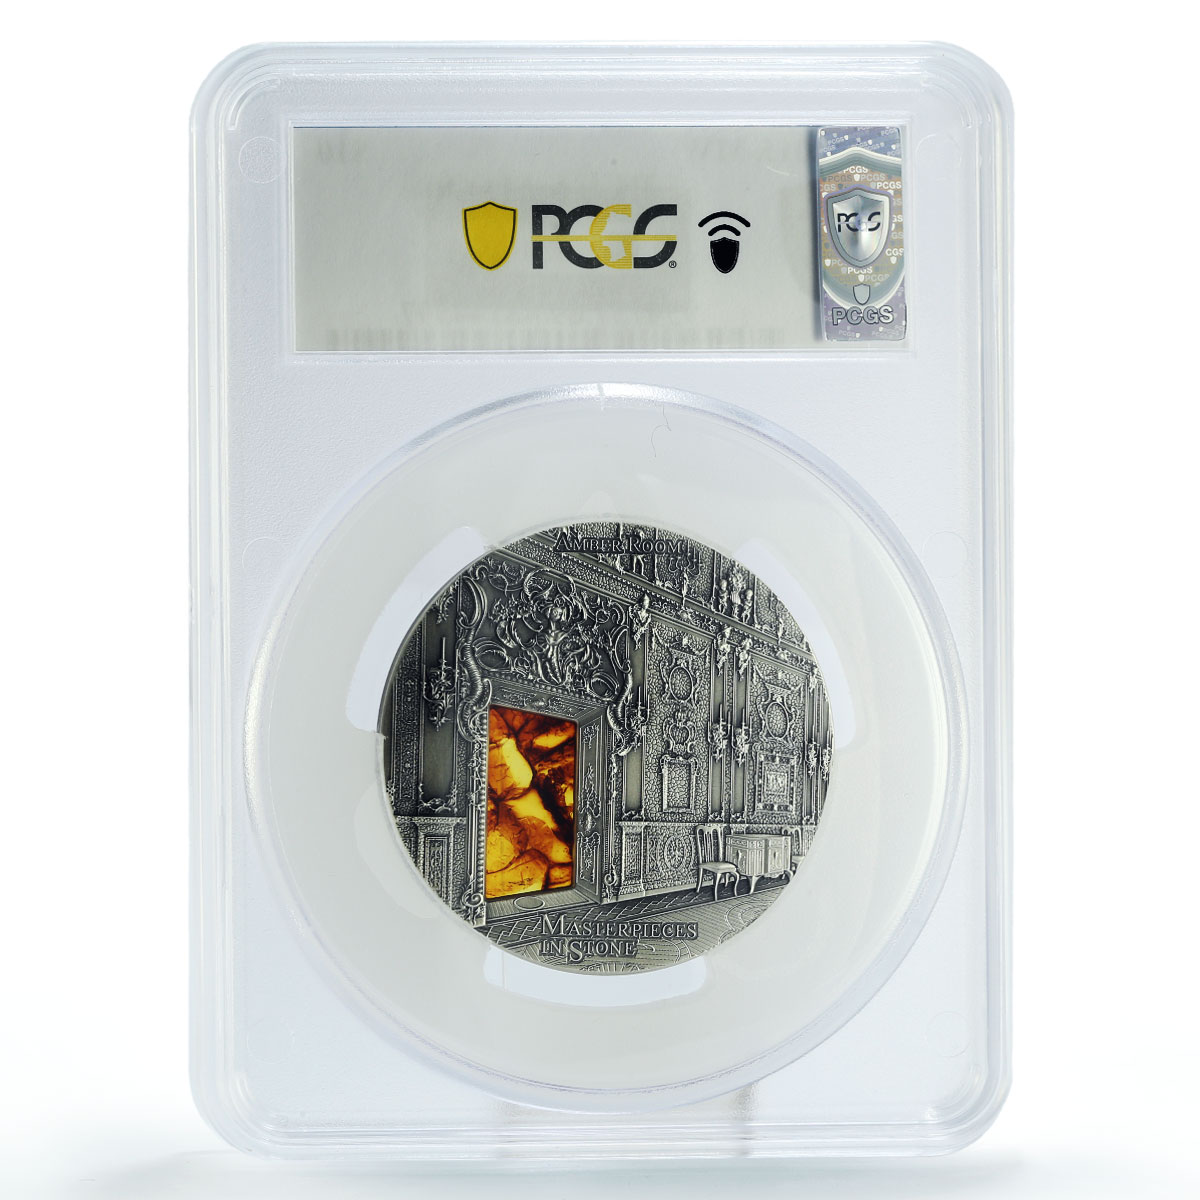 Fiji 10 dollars Stone Masterpieces Amber Room Art MS69 PCGS silver coin 2015